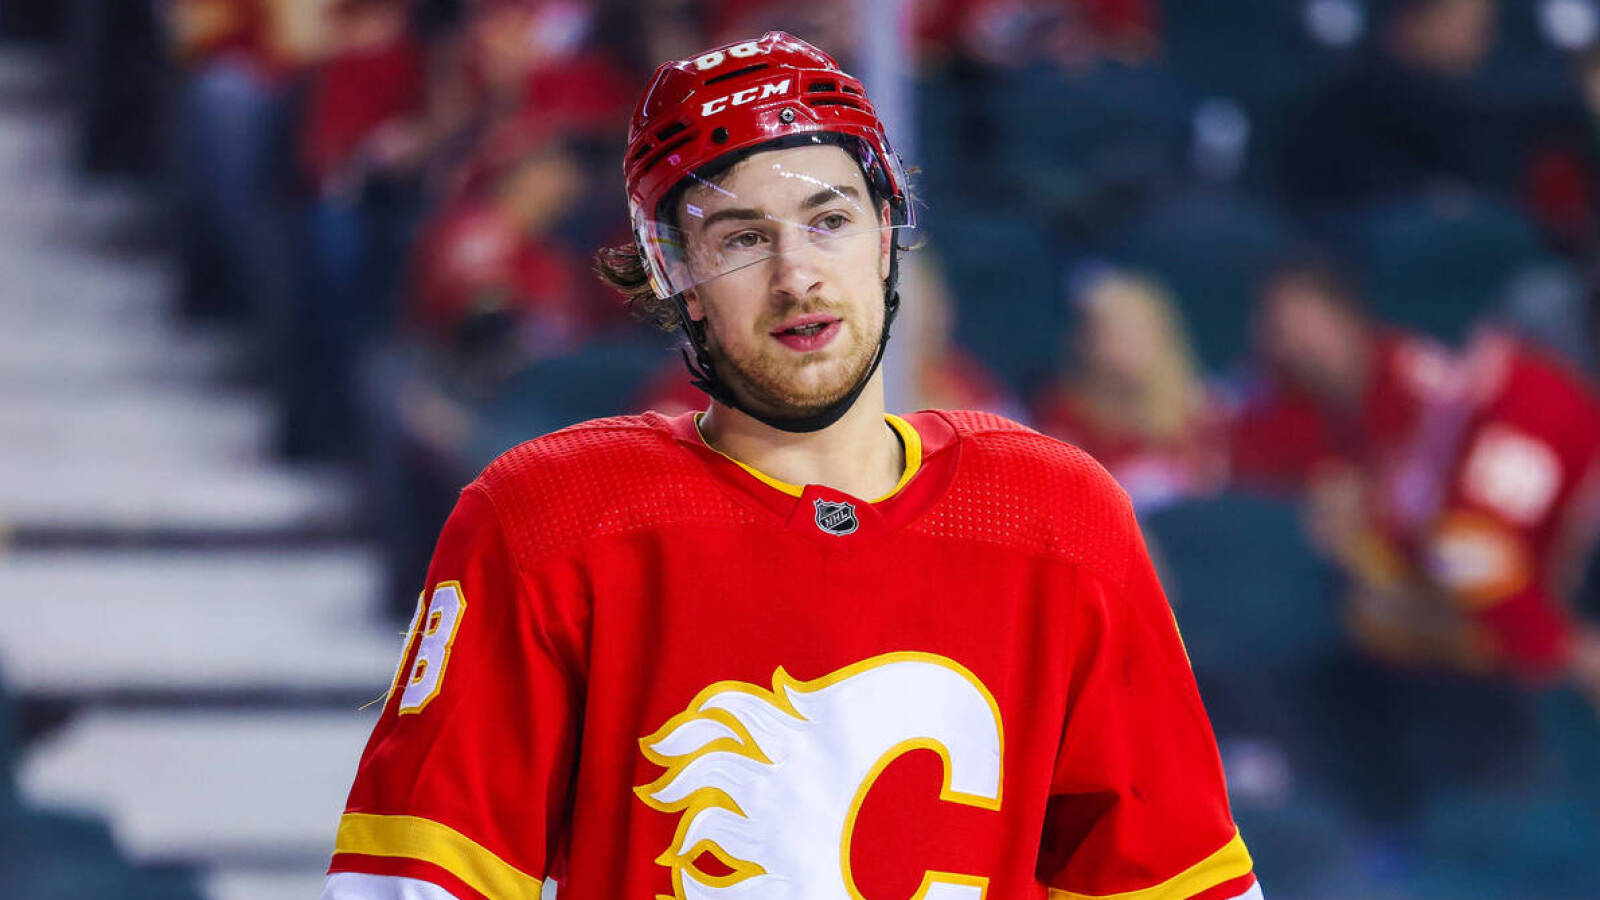 FLAMES RE-SIGN FORWARD ANDREW MANGIAPANE – Flames Communications